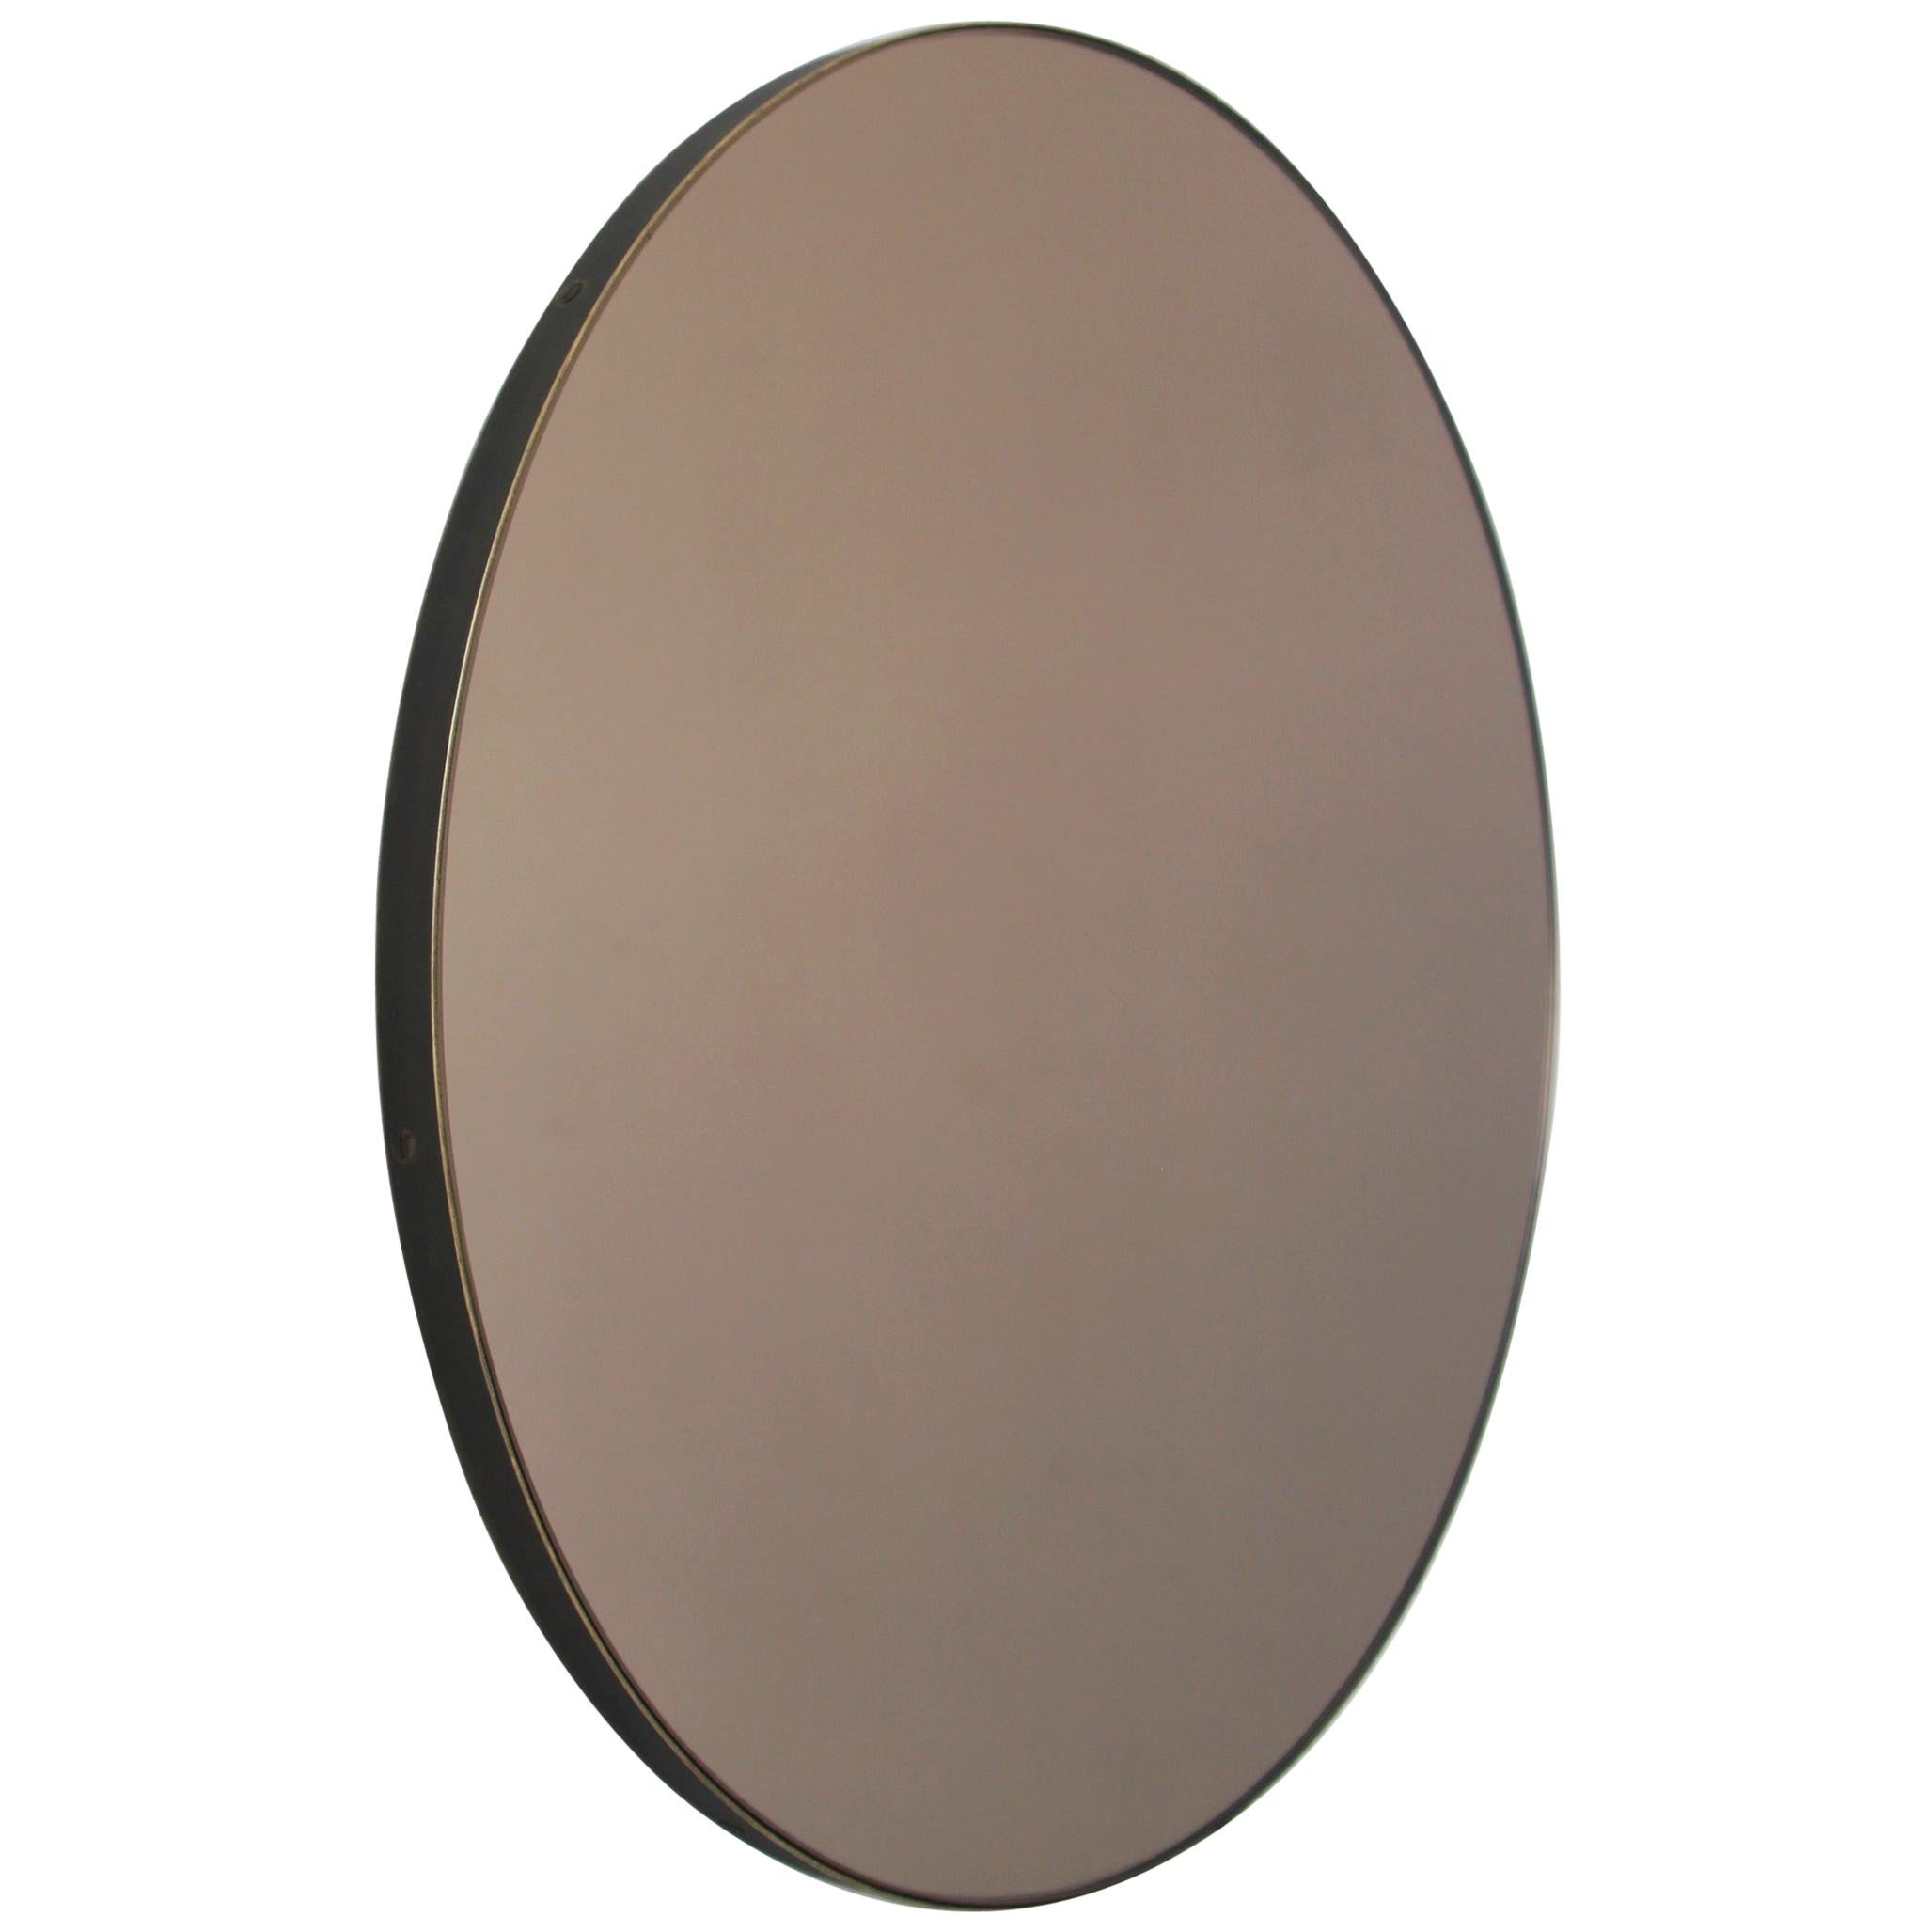 Orbis Bronze Tinted Round Contemporary Mirror with Bronze Patina Frame - Small